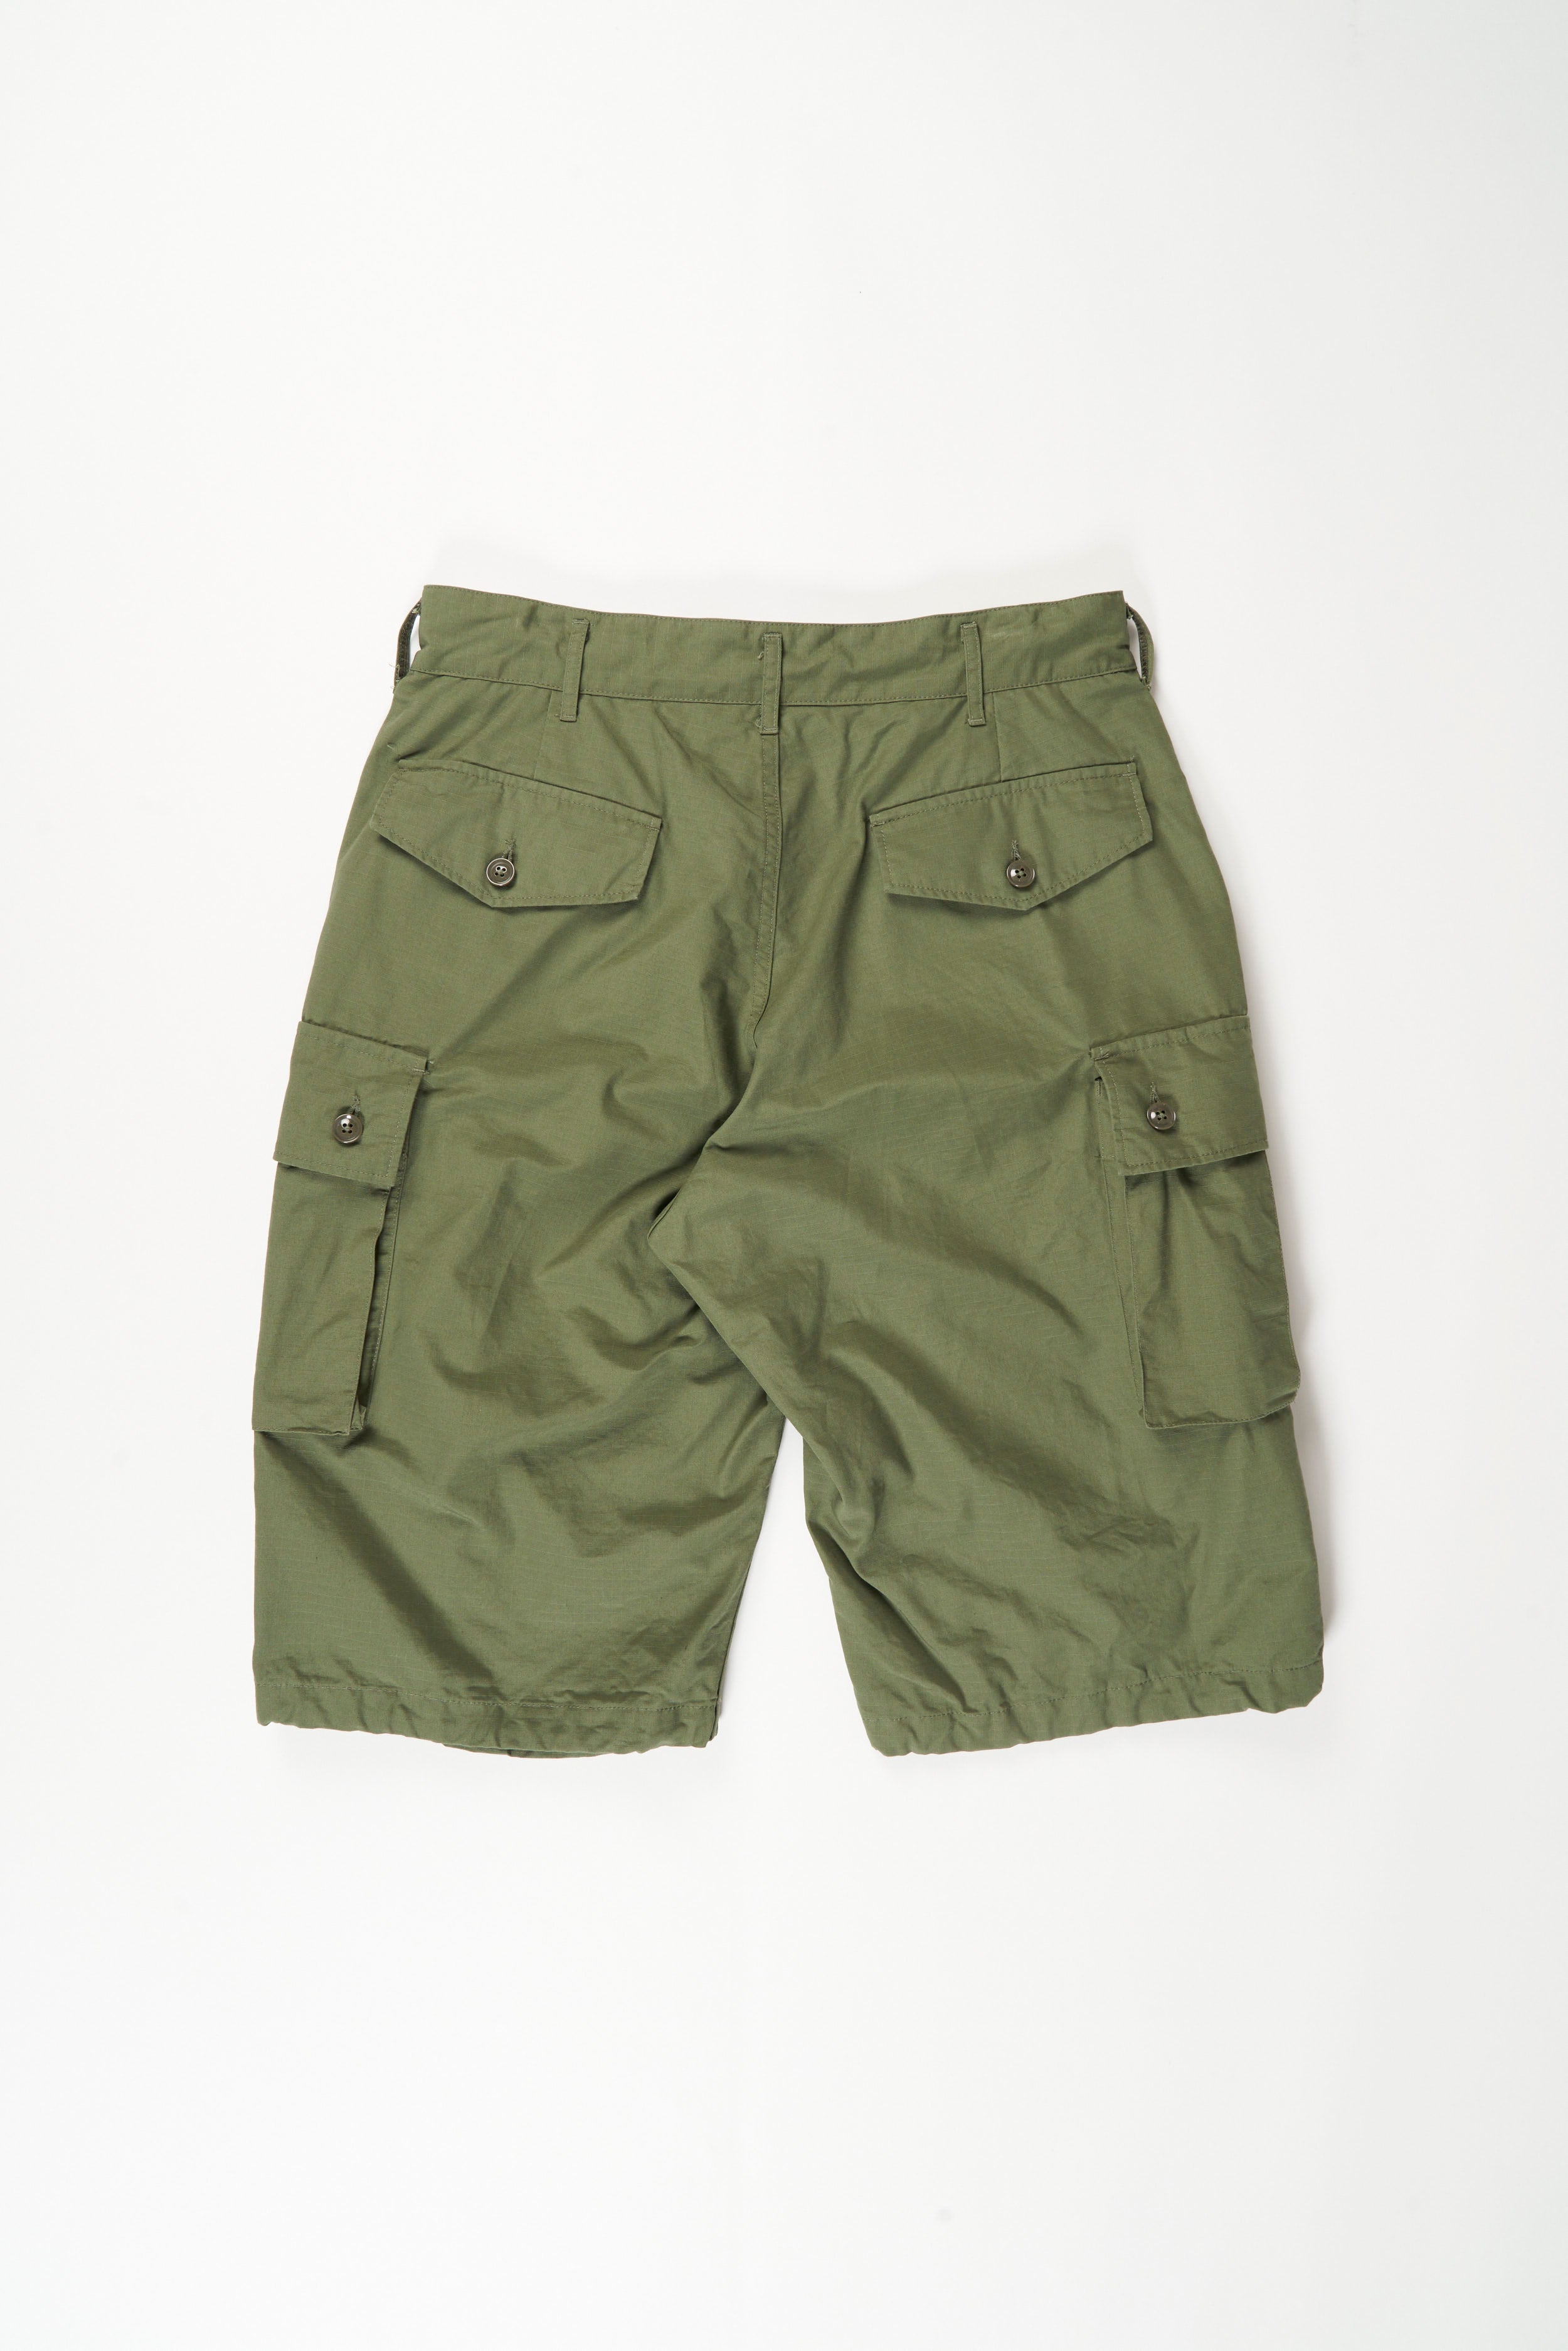 Engineered Garments FA Short - Olive Cotton Ripstop – Totem Brand Co.